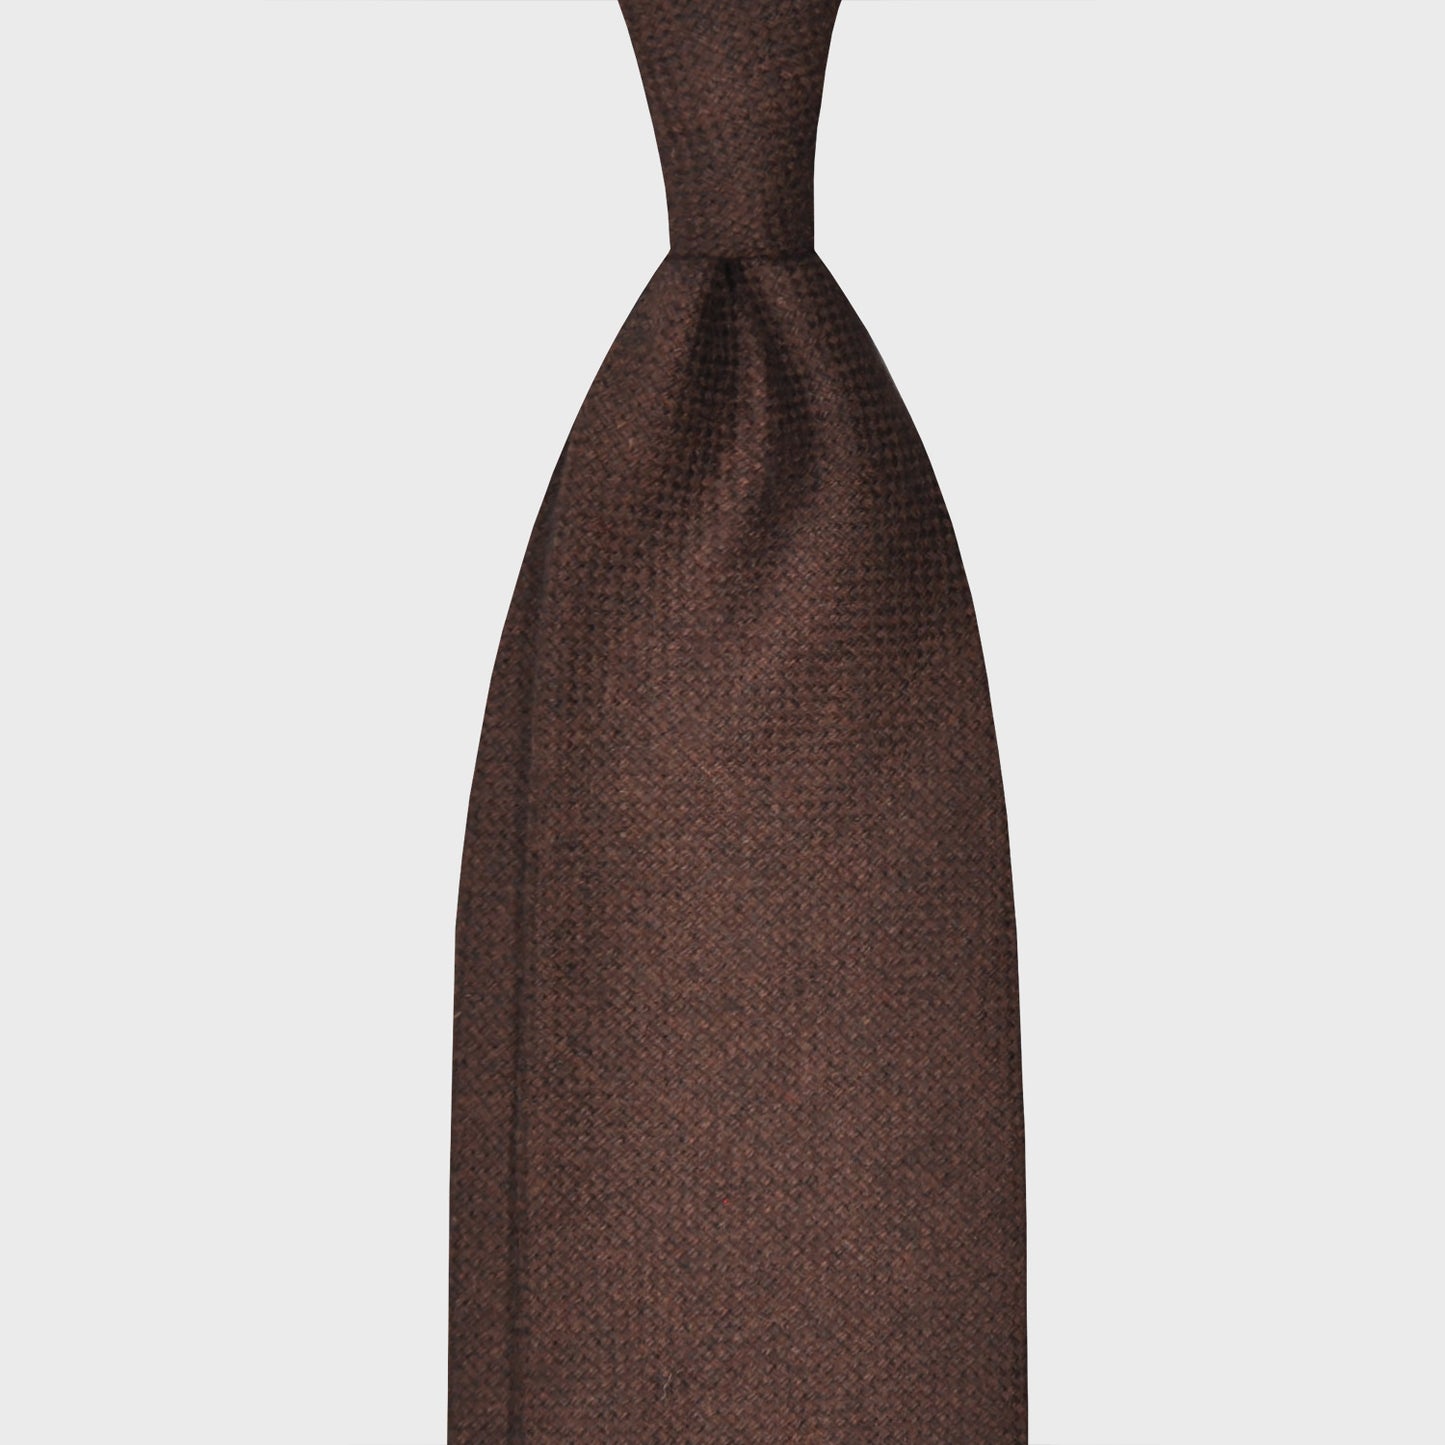 Load image into Gallery viewer, Coffee Brown Light Flannel Twill Wool Tie Unlined 3 Folds. Soft and light flannel twill wool tie, handmade F.Marino Napoli for Wools Boutique Uomo, coffee brown color, soft fabric to the touch, not bristly, ideal for a regular knot.
